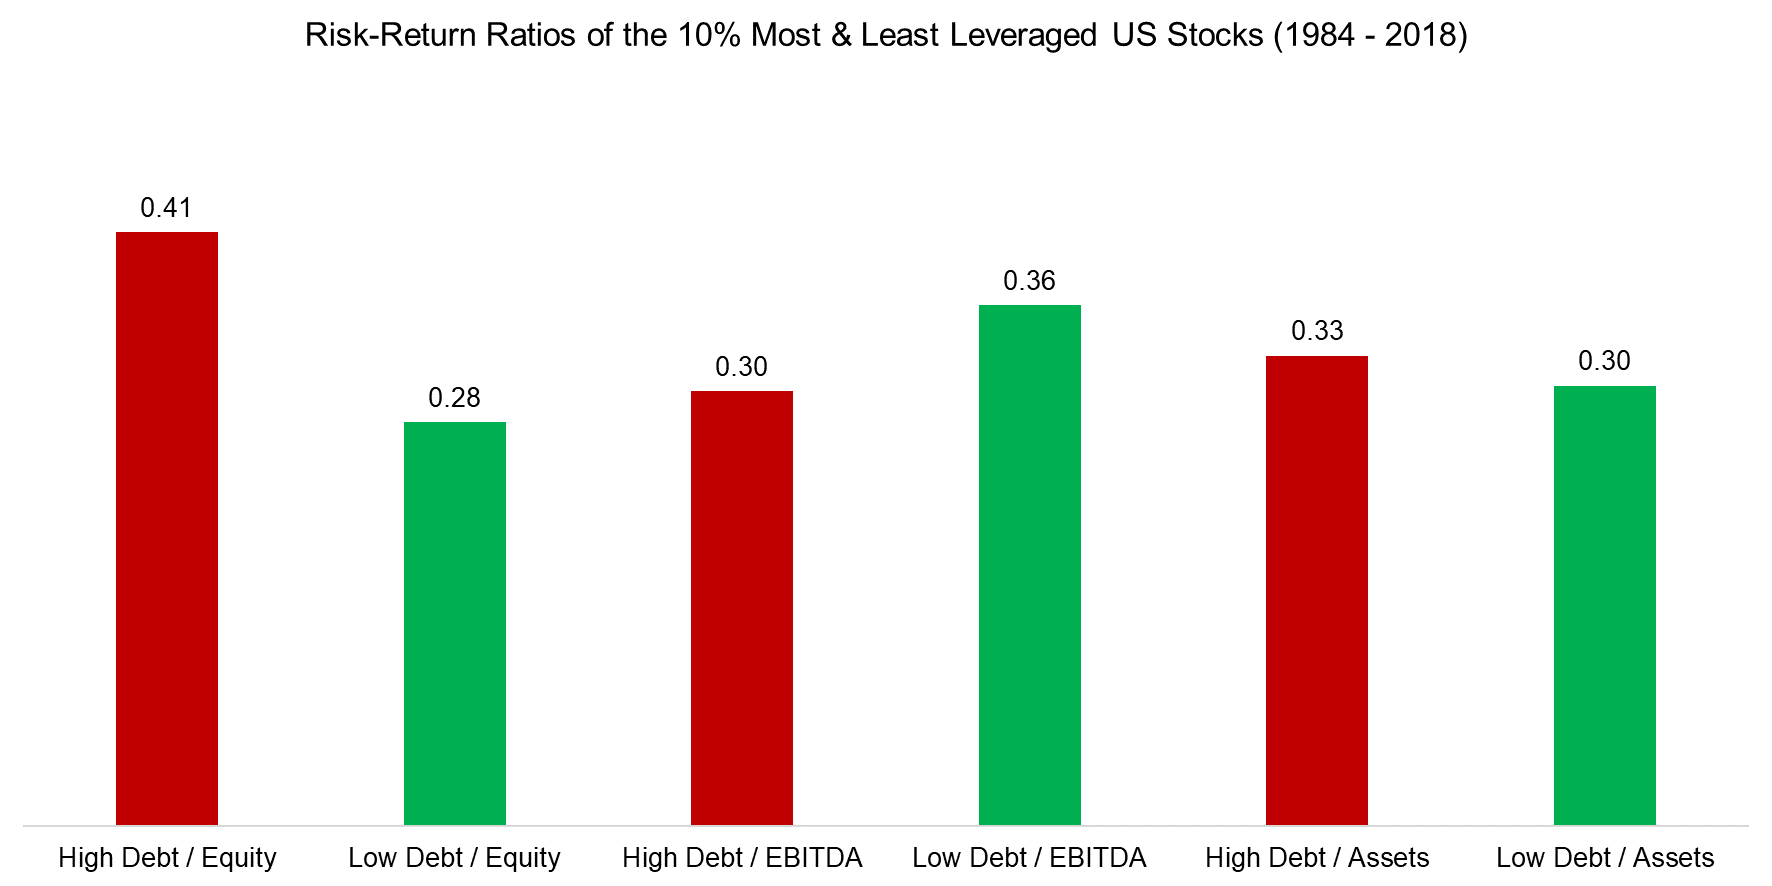 Risk-Return Ratios of the 10% Most & Least Leveraged US Stocks (1984 - 2018)